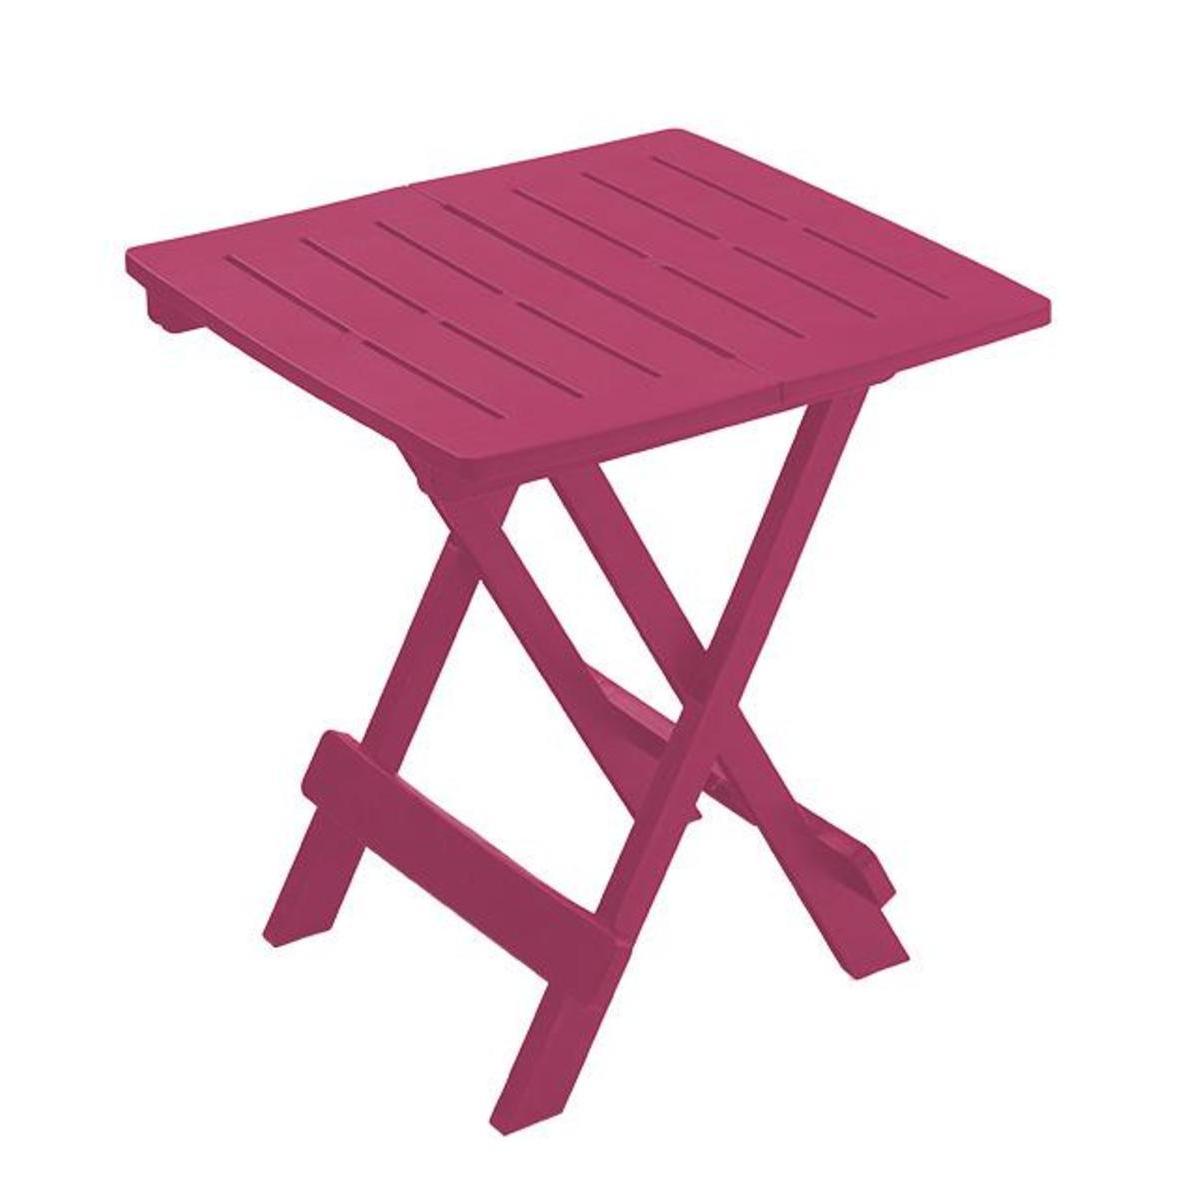 Table d'appoint Adiko - 44 x 44 x H 50 cm - Rose